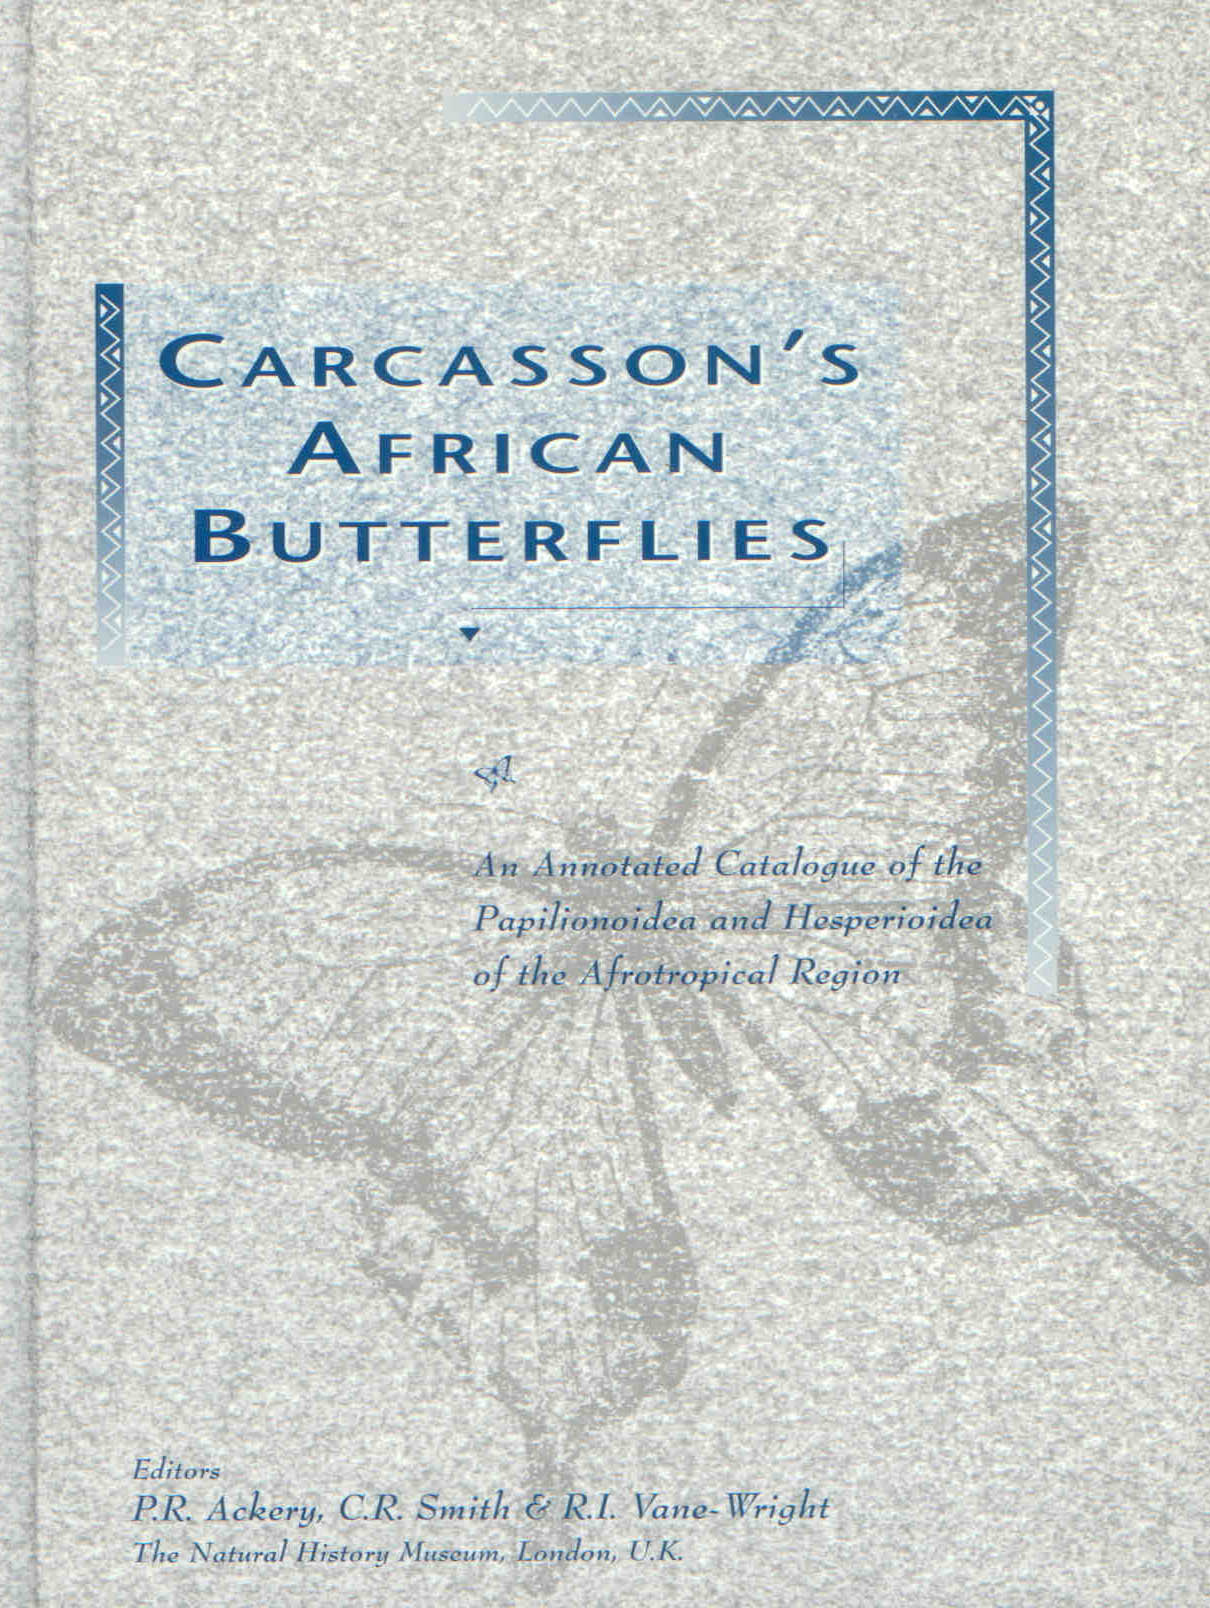 Ackery, P.R.; Smith, C.R.; Vane-Wright, R.I. (Eds) - Carcasson's African Butterflies: An Annotated Catalogue of the Papilionoidea and Hesperioidea of the Afrotropical Region